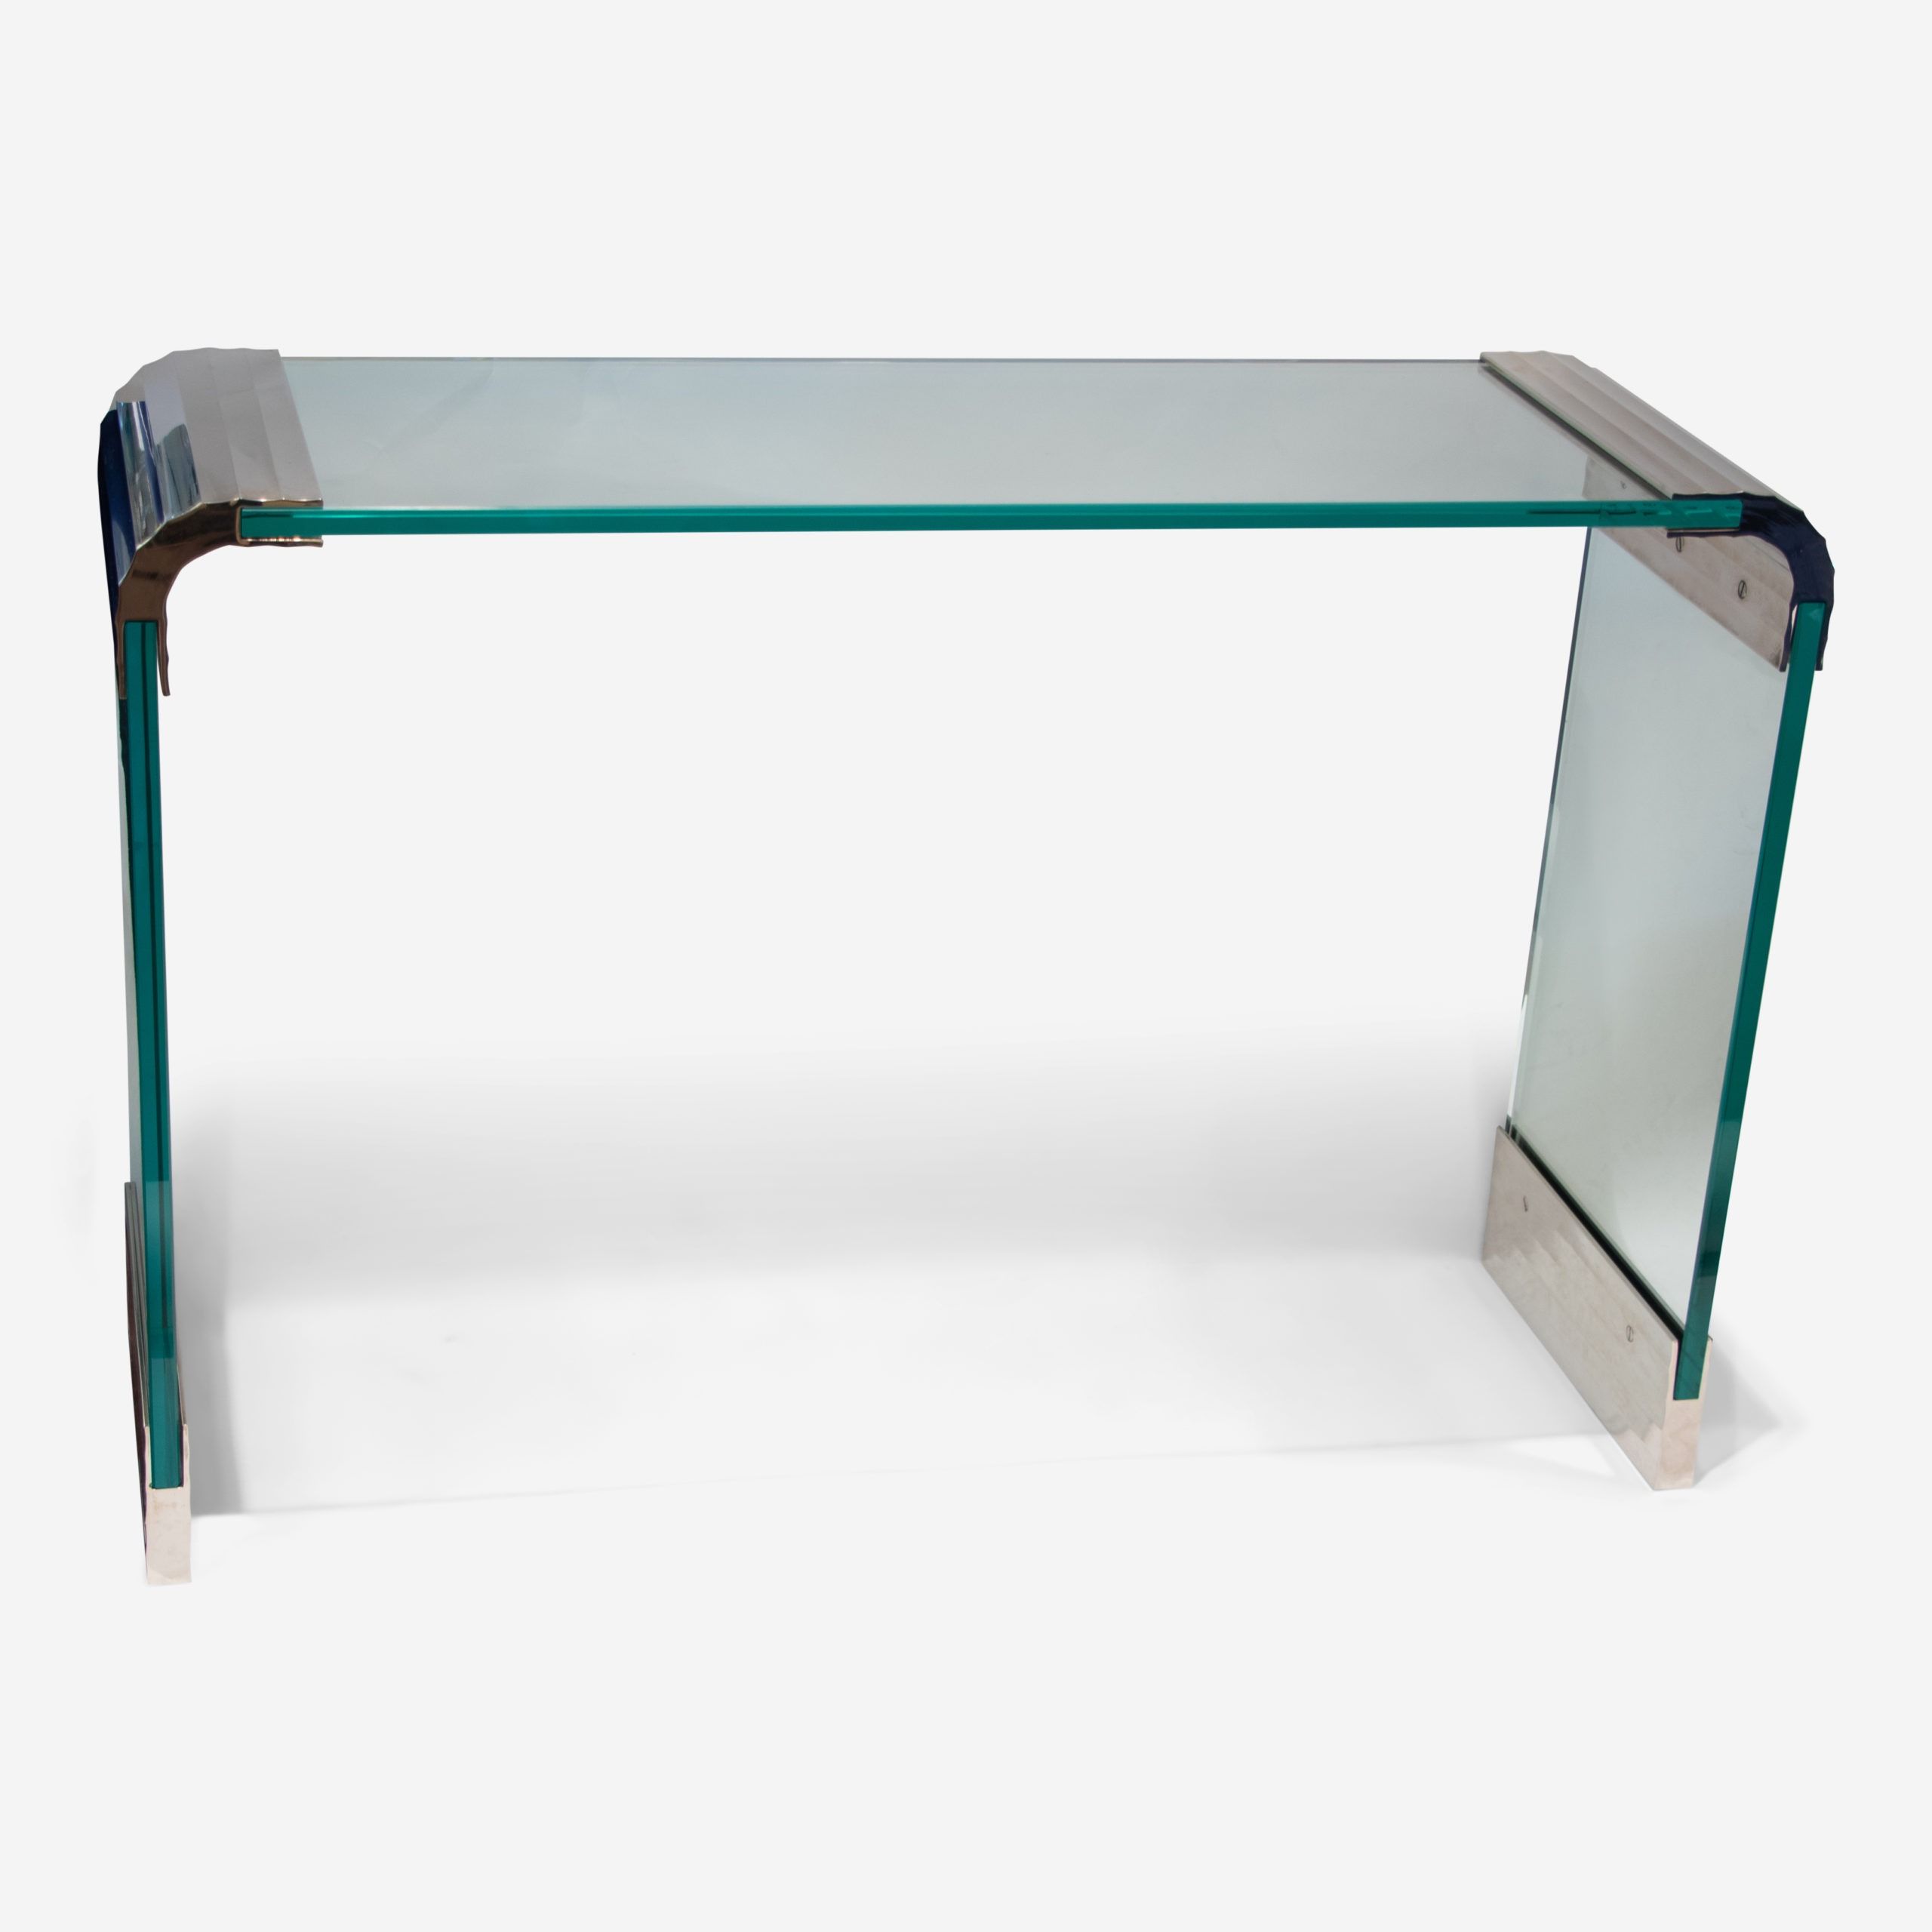 2020 Chrome And Glass Console Table – The Silver Fund Regarding Chrome Console Tables (View 7 of 10)